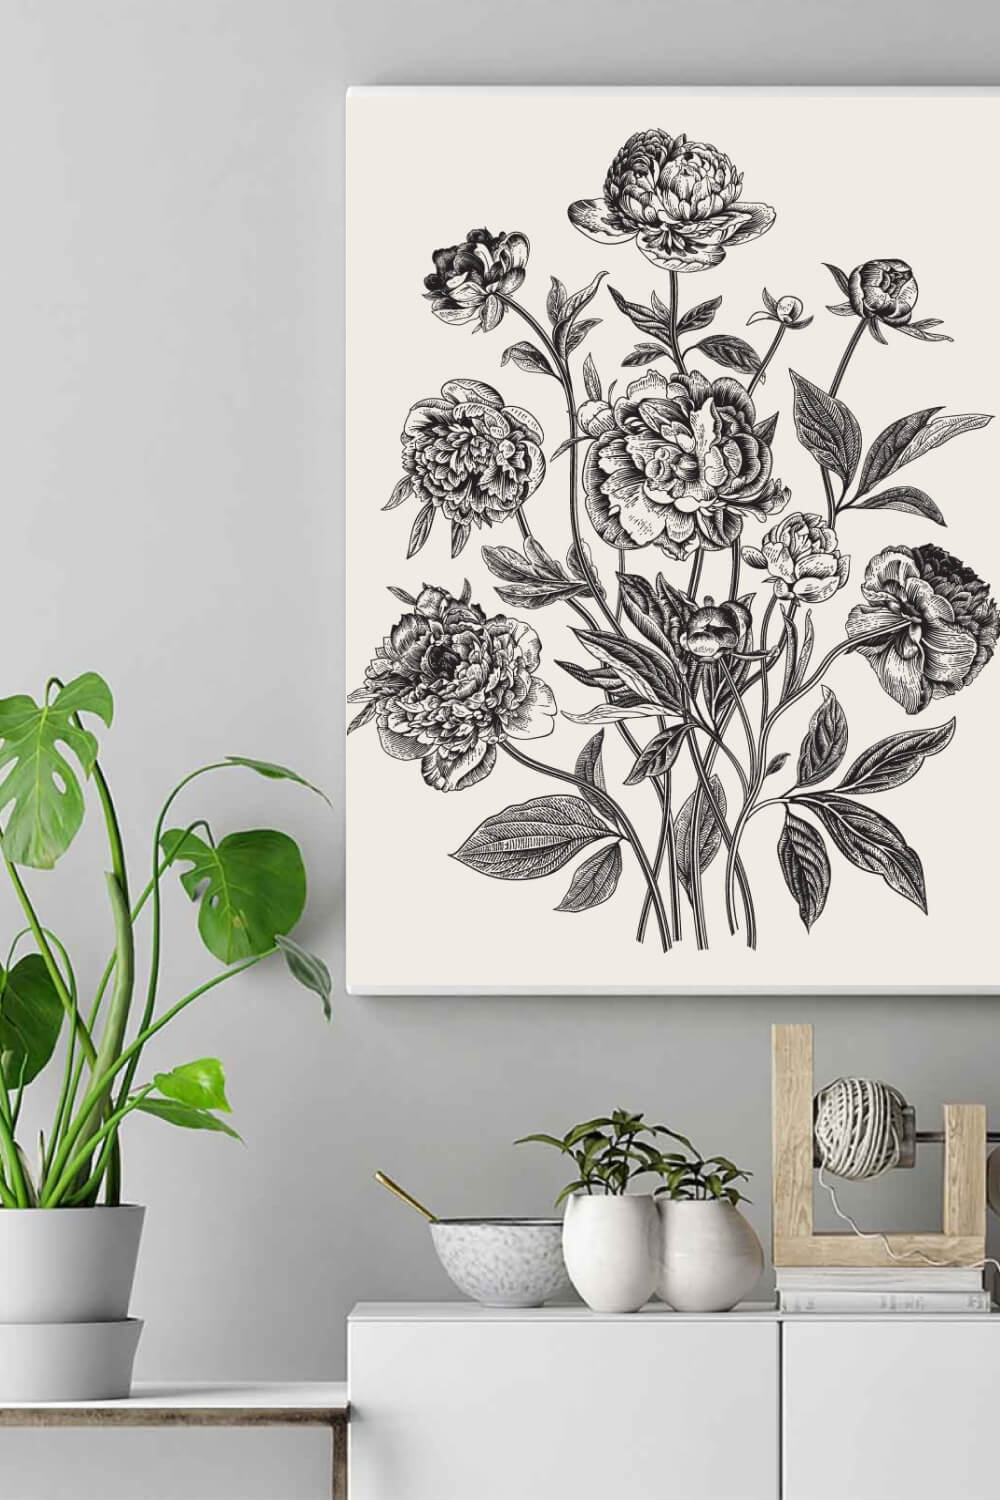 Vintage illustrations of peonies in the picture.